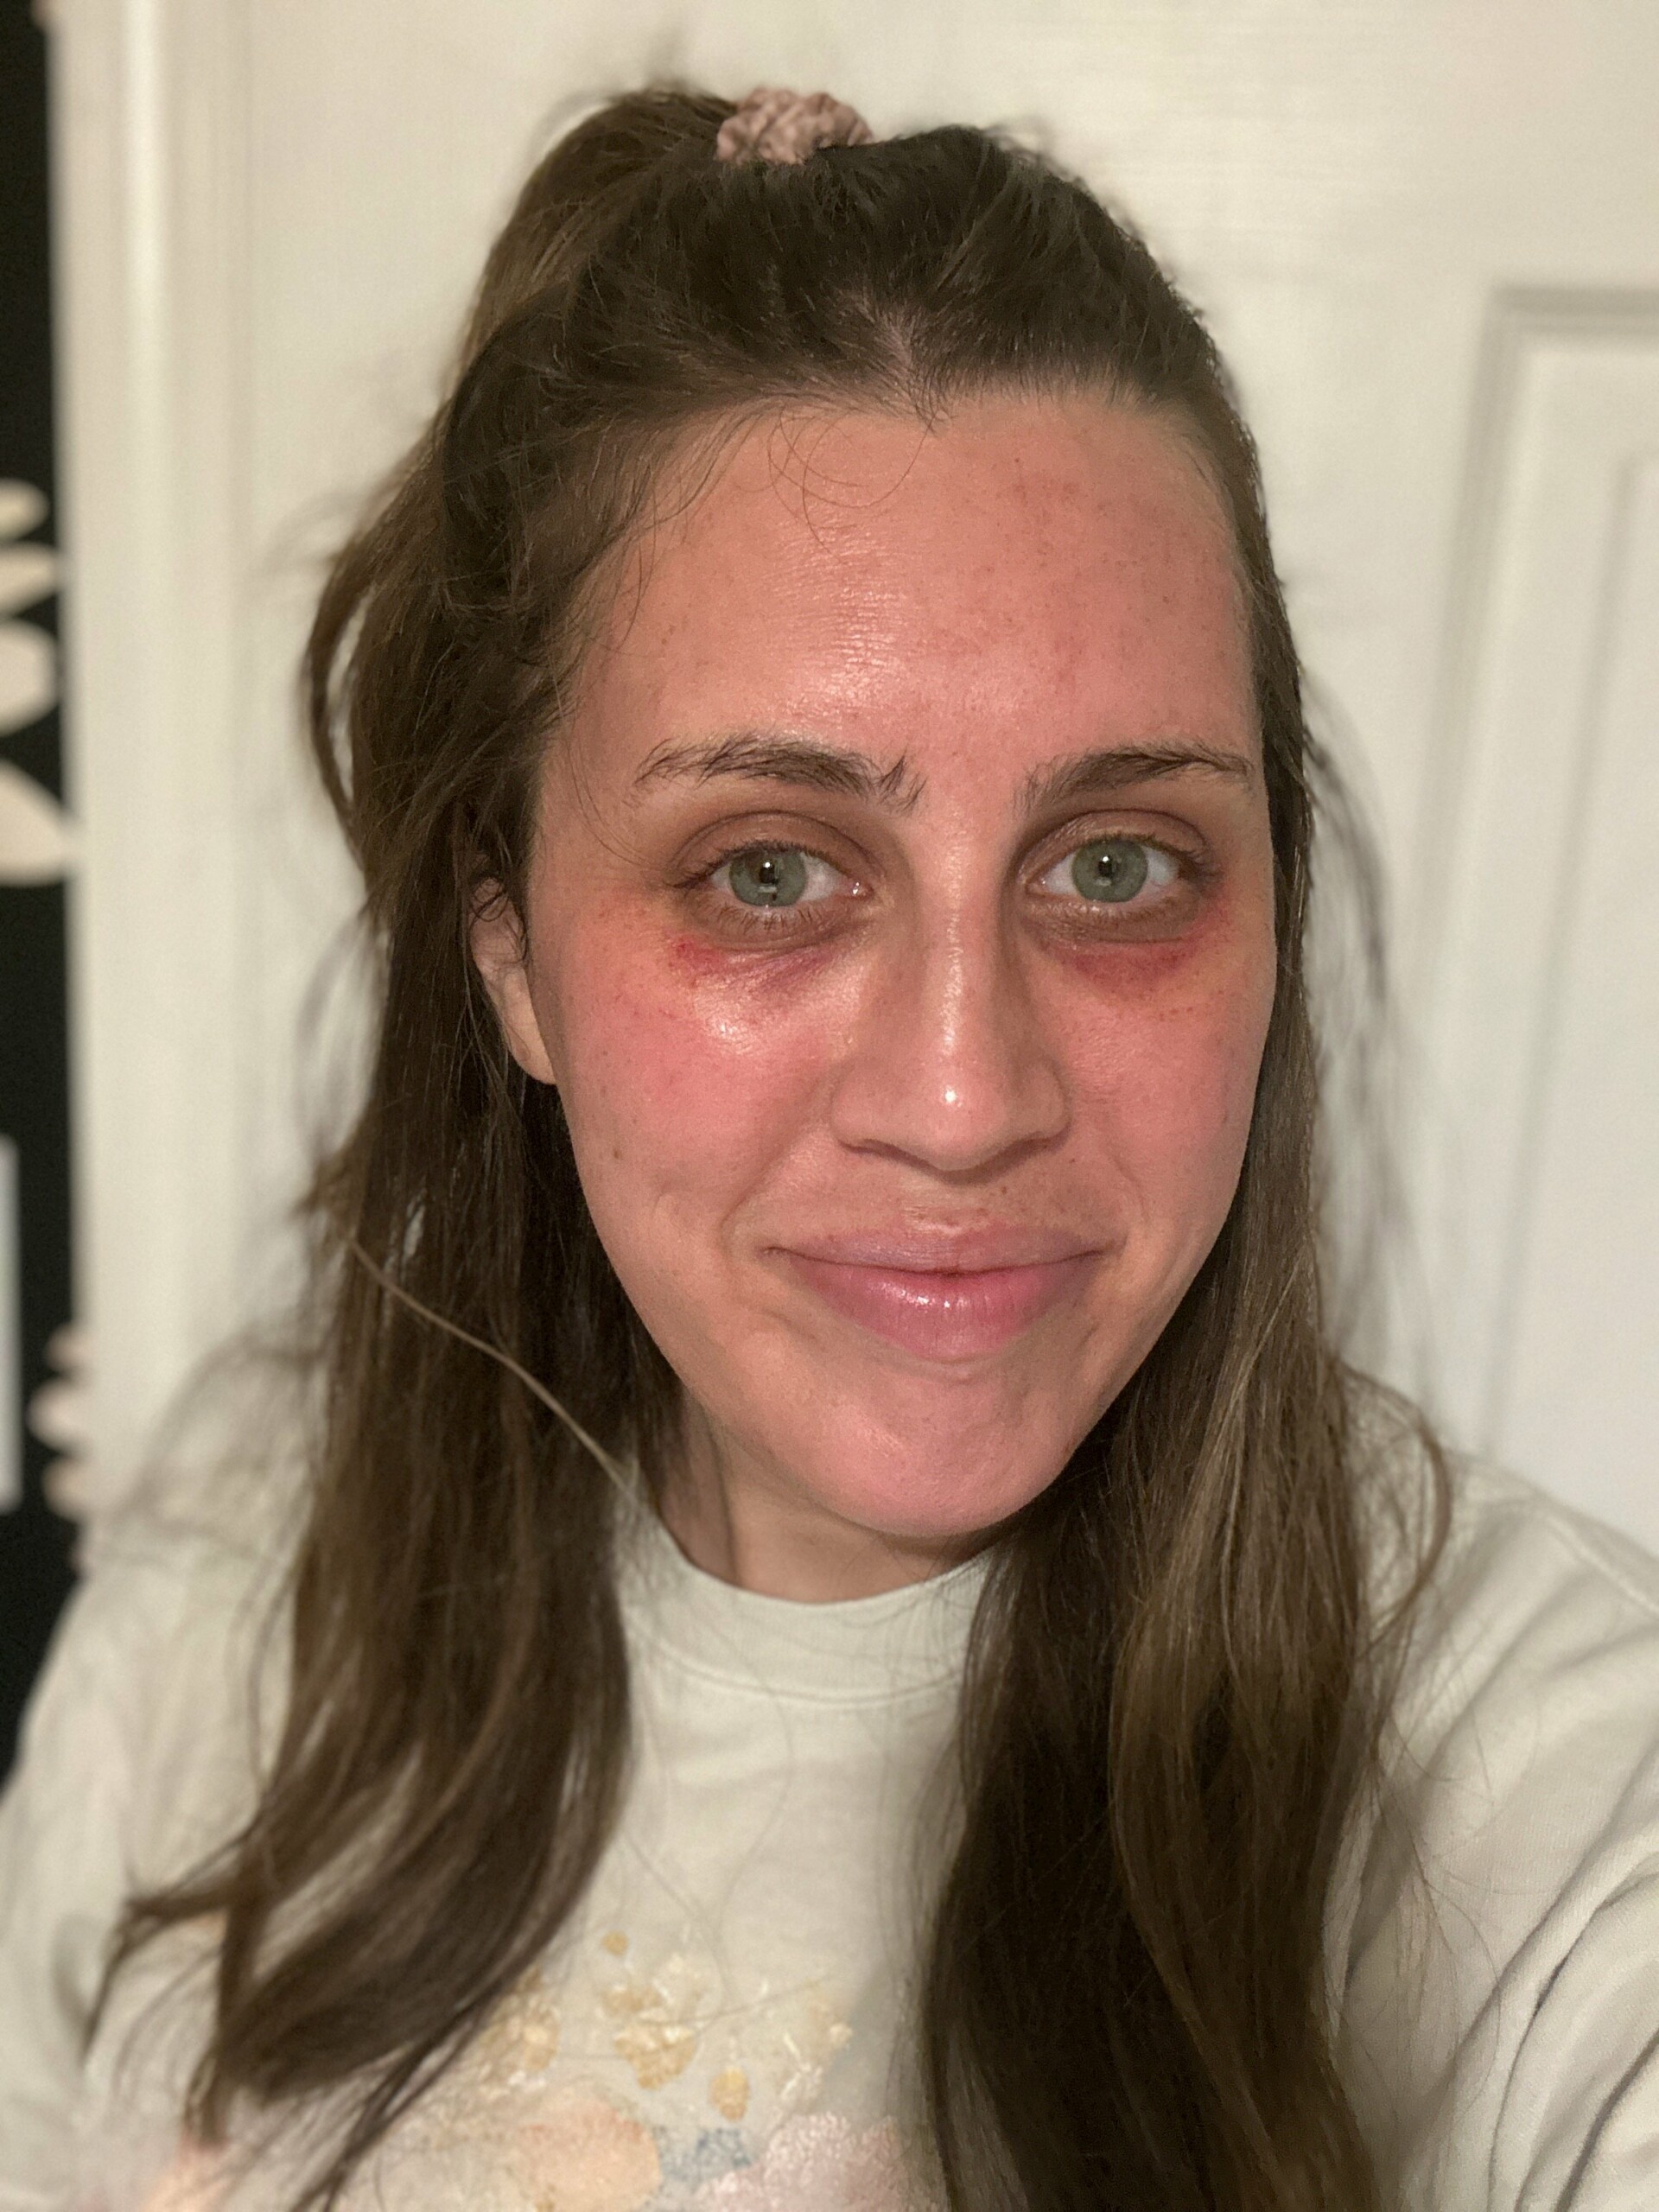 i-tried-professional-microneedling,-&-my-dark-circles-have-never-looked-better